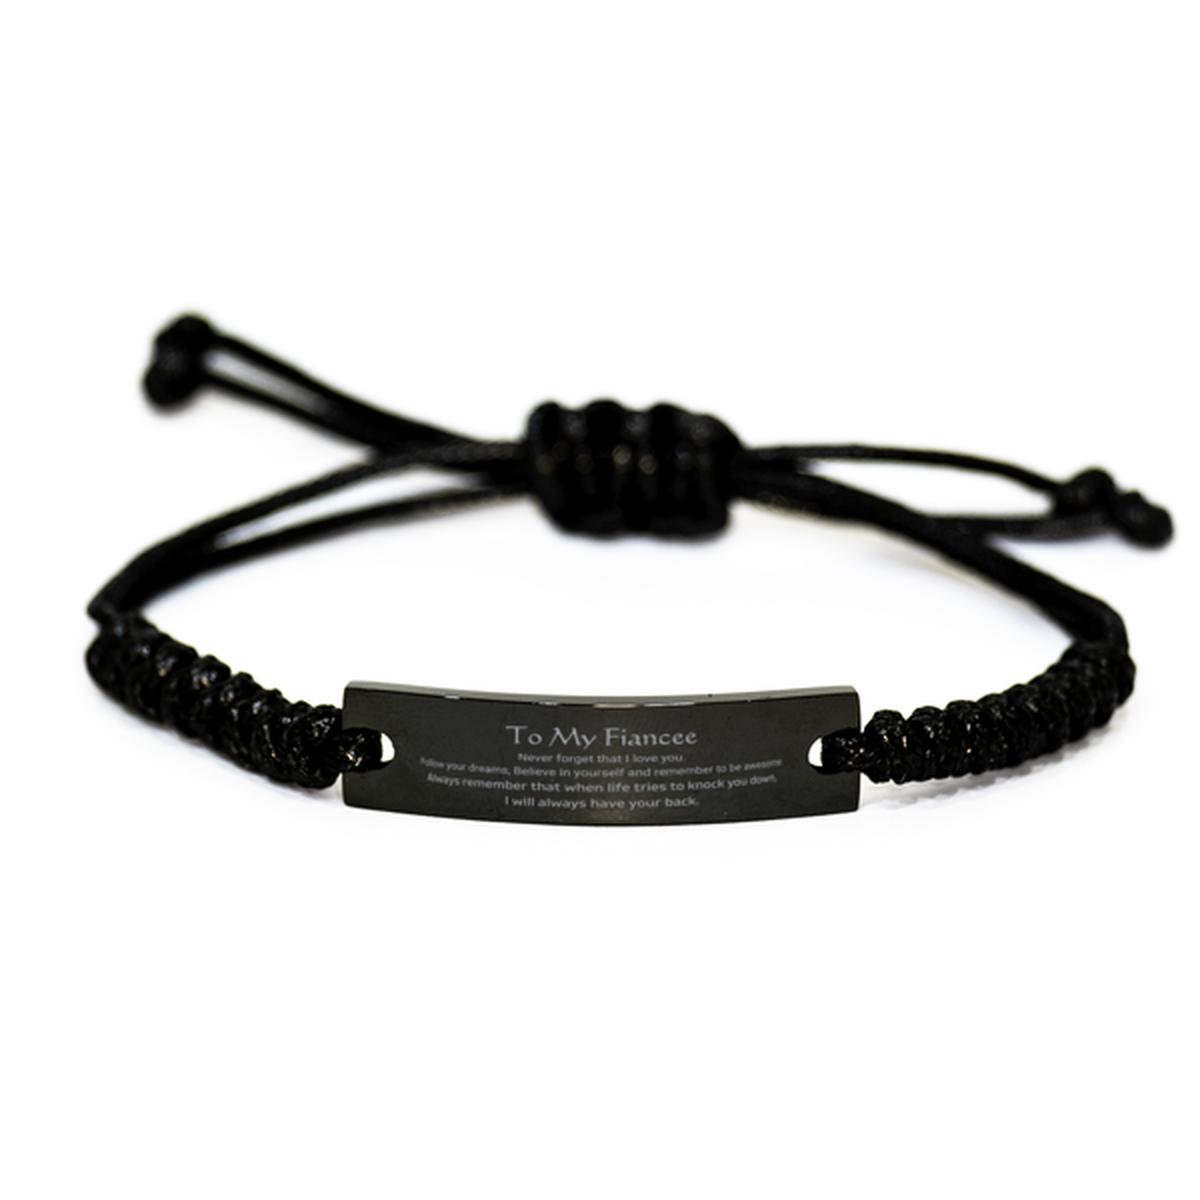 Inspirational Gifts for Fiancee, Follow your dreams, Believe in yourself, Fiancee Black Rope Bracelet, Birthday Christmas Unique Gifts For Fiancee